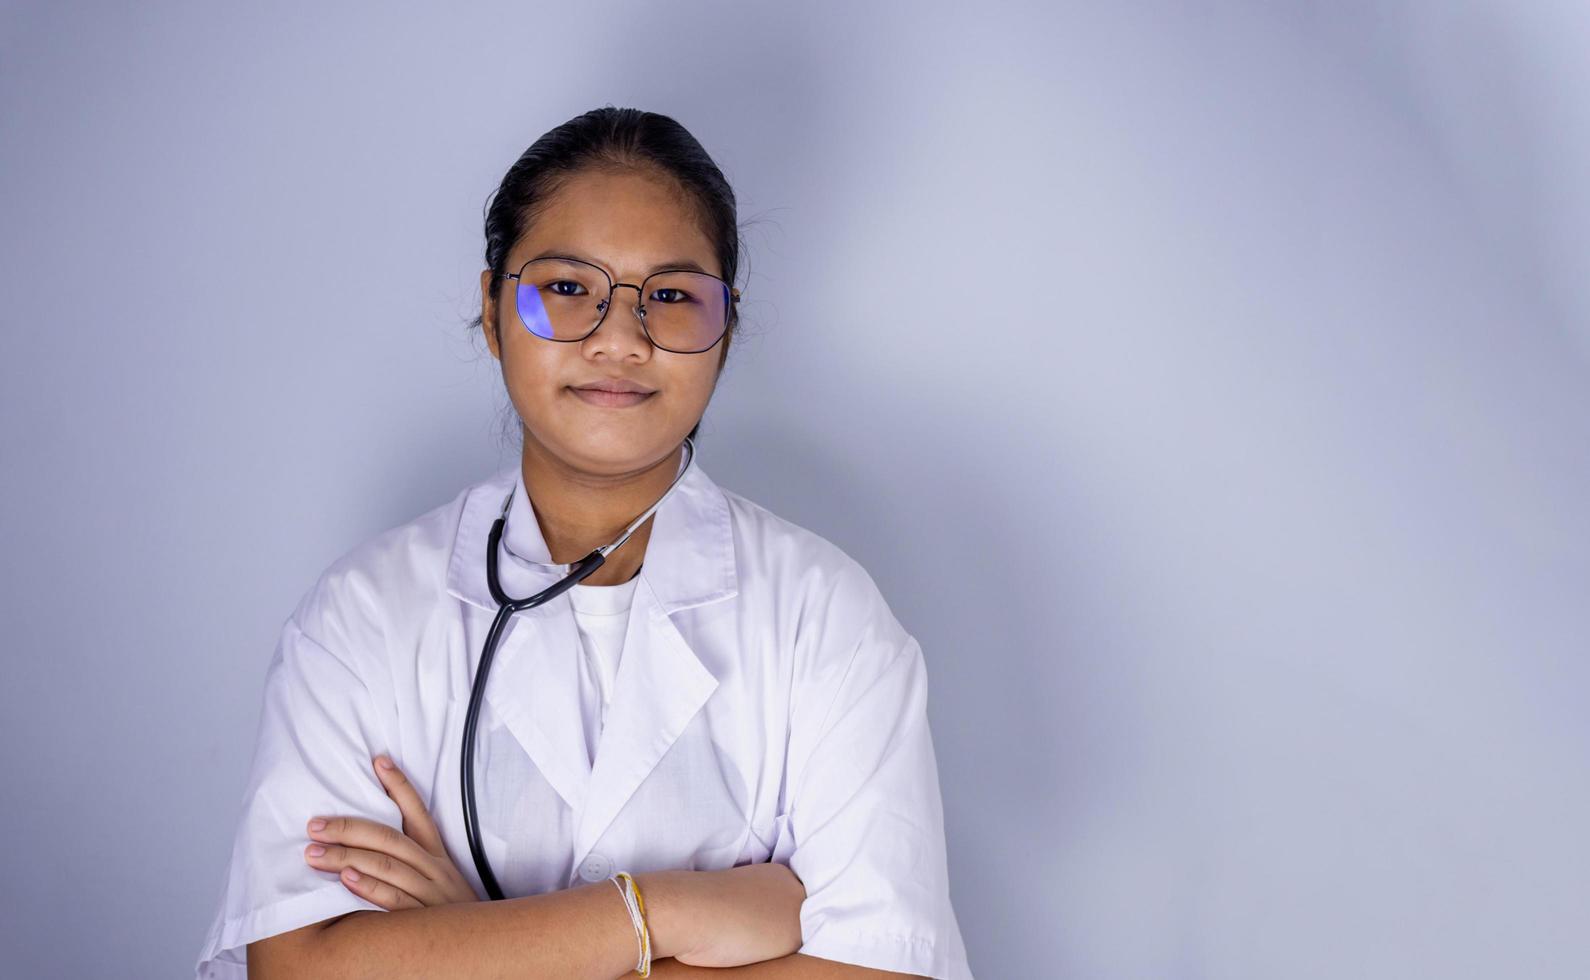 Portrait of a female doctor wearing glasses Standing with arms crossed on a white background. photo